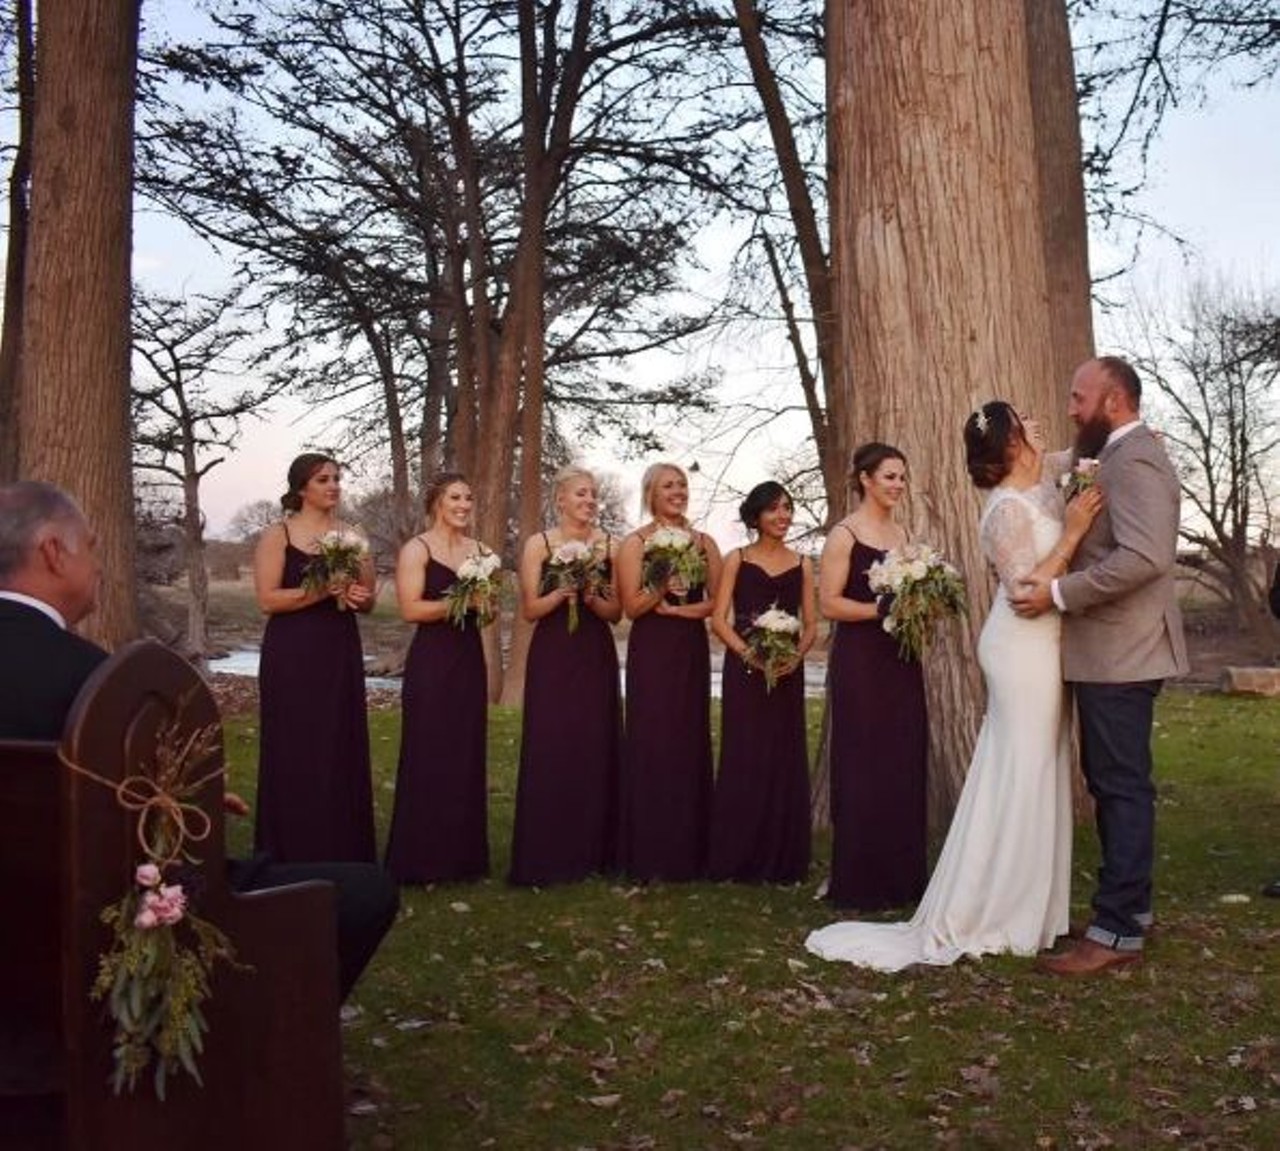 Cherokee Rose
Get hitched in a barn that still has its original wood from the 1800s or along the Guadalupe River under cypress trees more than 100 years old. You can&#146;t go wrong.
335 FM 473, Comfort, txcherokeerose.com
Photo via Instagram, karahlynette